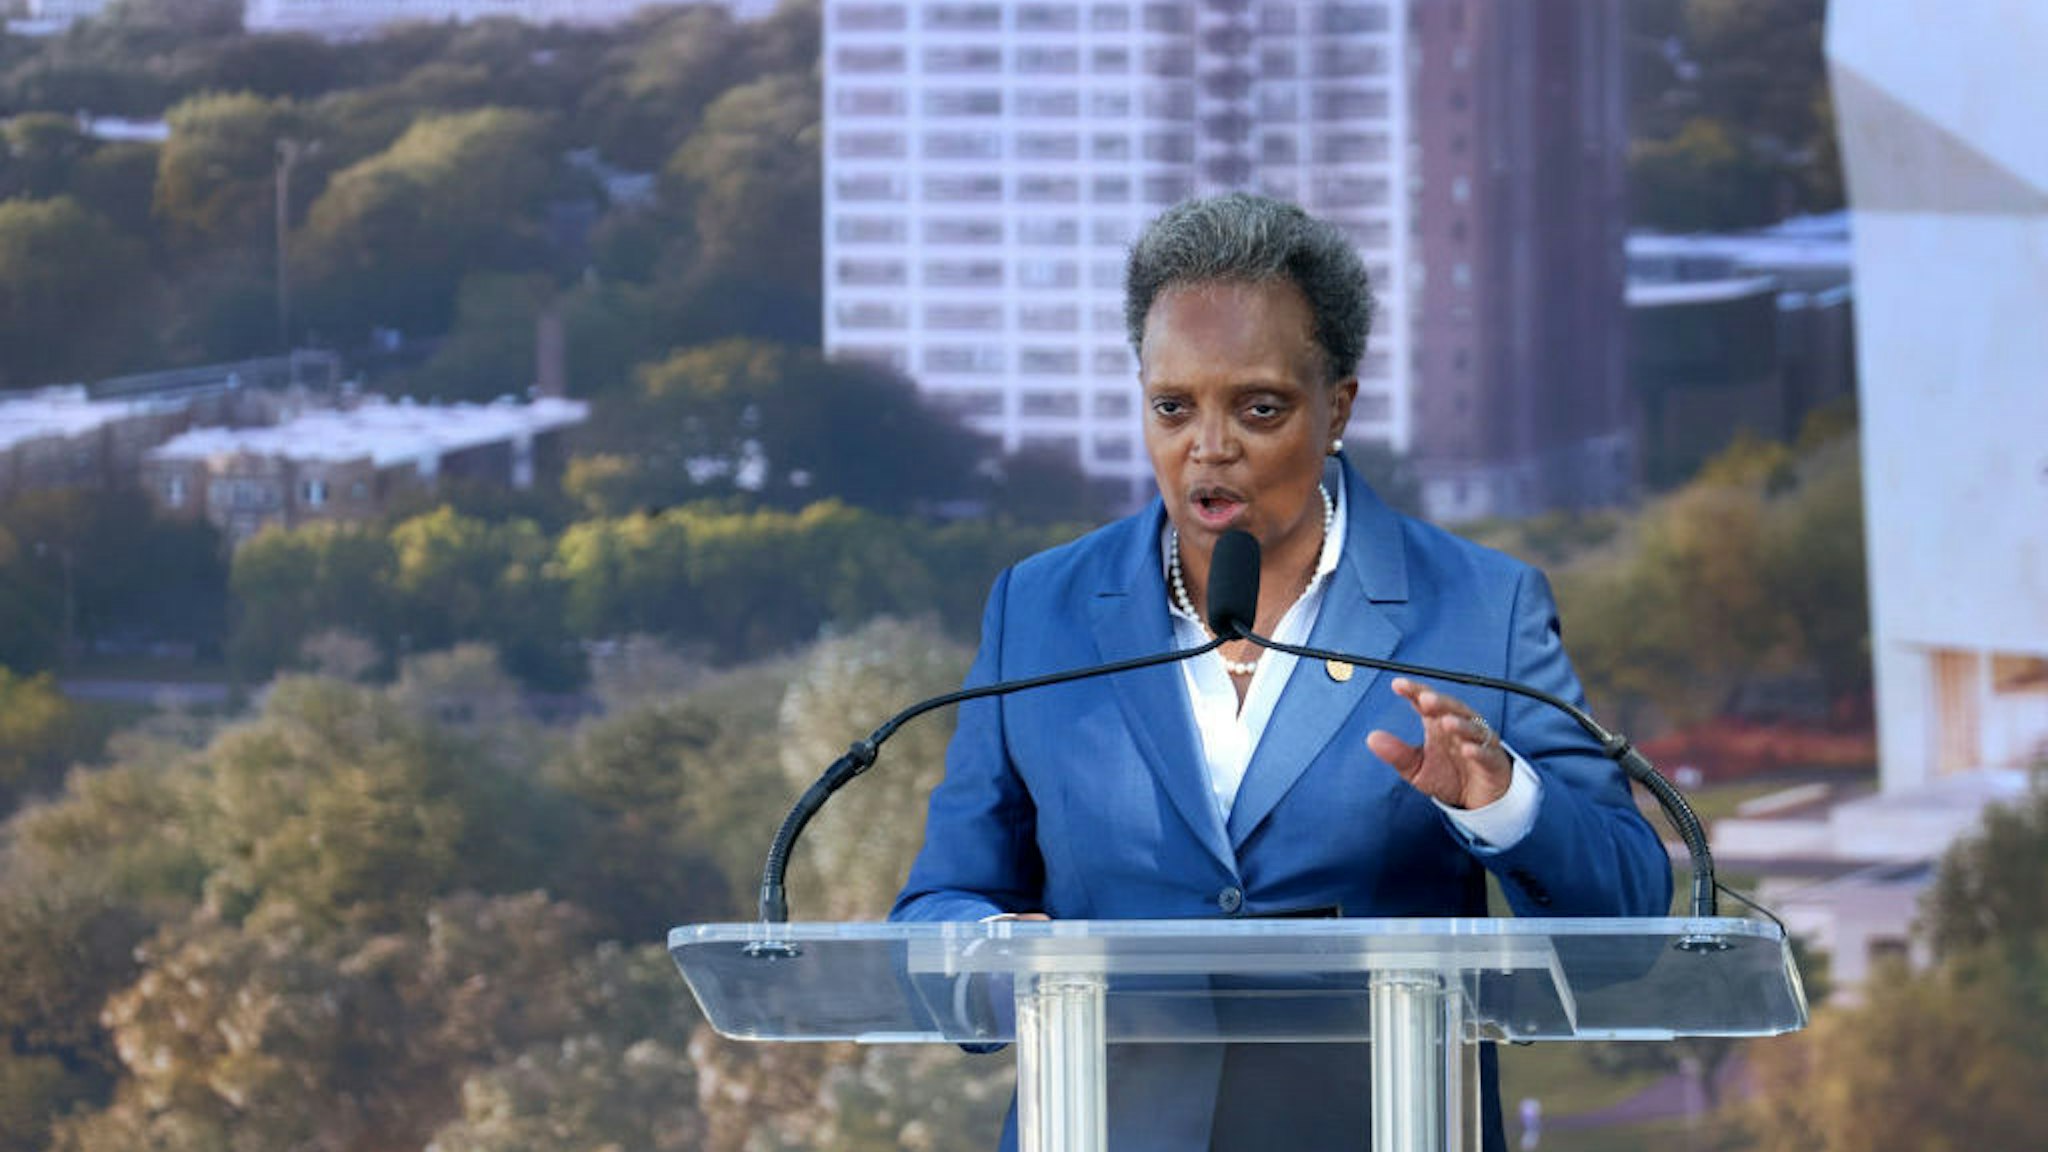 CHICAGO, ILLINOIS - SEPTEMBER 28: Chicago mayor Lori Lightfoot speaks during a ceremonial groundbreaking at the Obama Presidential Center in Jackson Park on September 28, 2021 in Chicago, Illinois. Construction of the center was delayed by a long legal battle undertaken by residents who objected to the center being built in a city park. (Photo by Scott Olson/Getty Images)